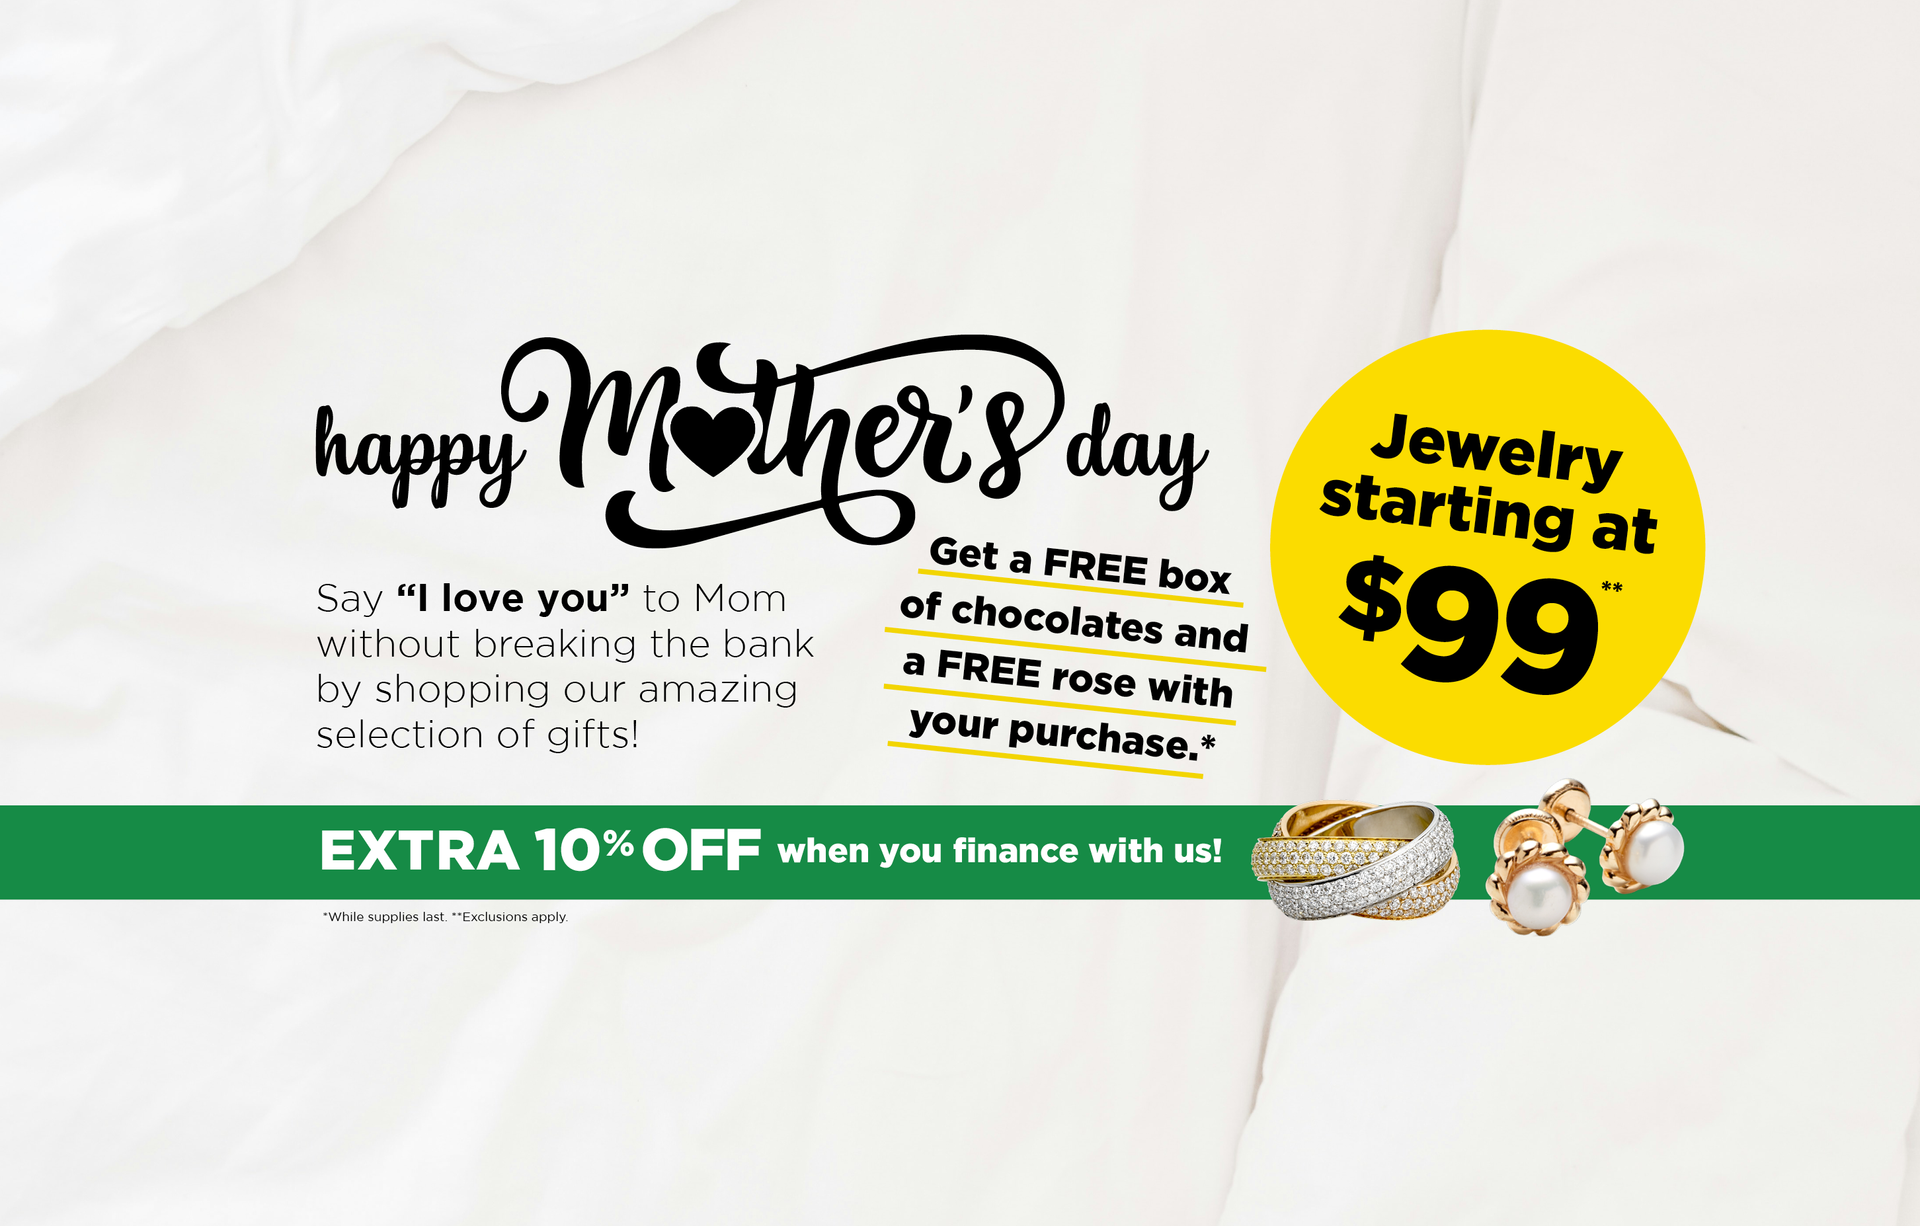 MOTHER'S DAY PROMO IMAGE